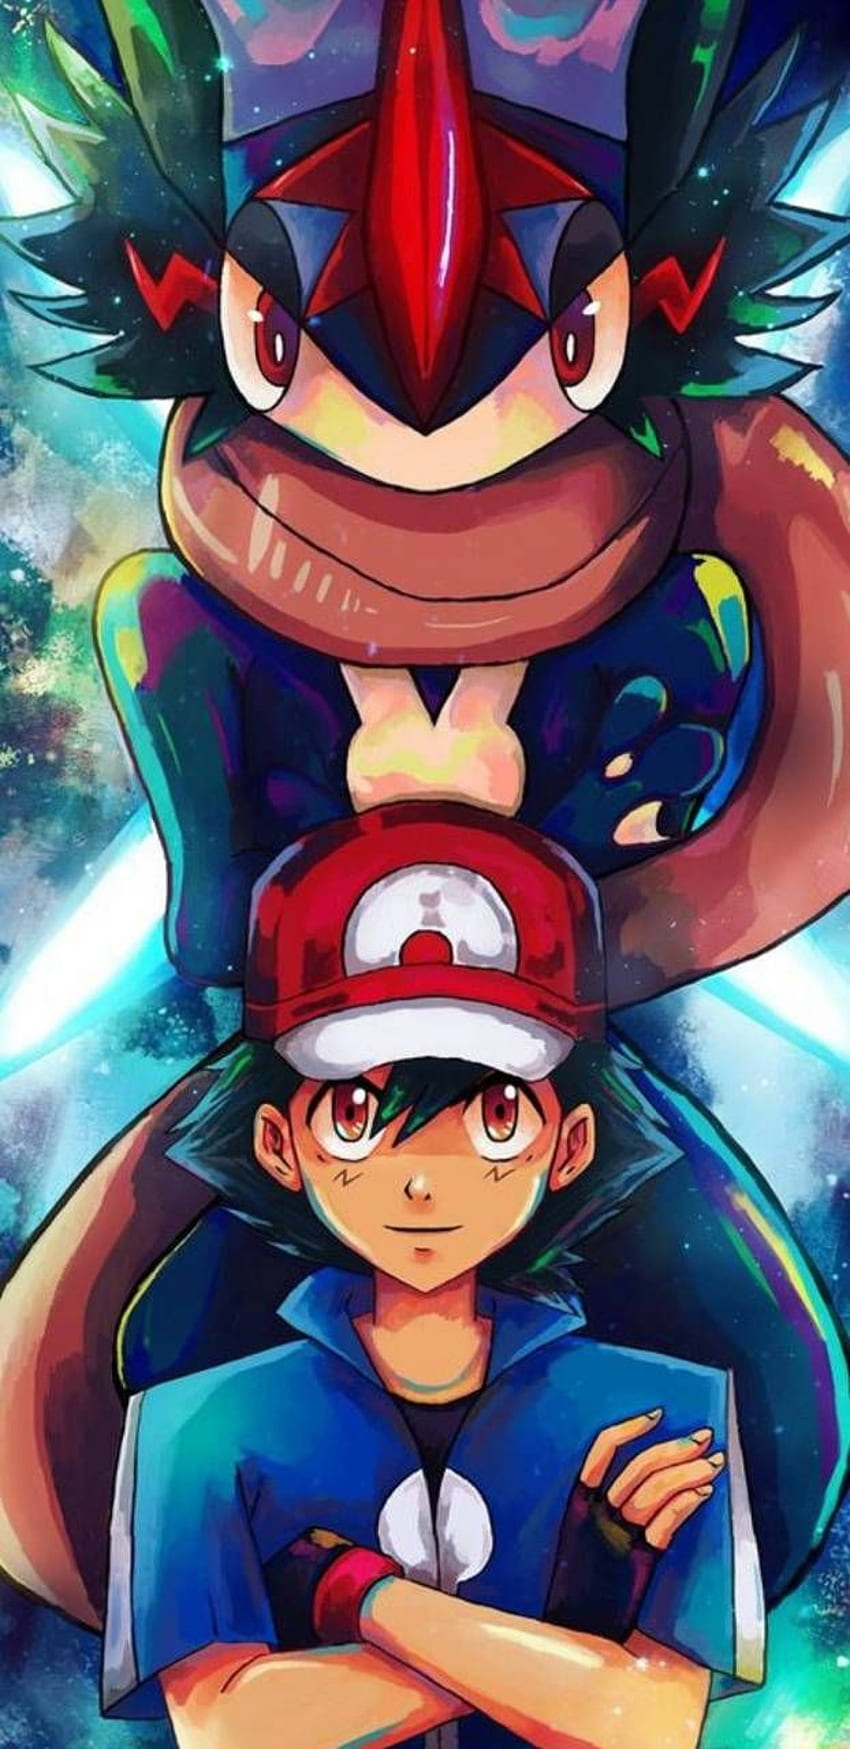 Pokemon ash by Get_Rickrolled - 2b now. Browse millions of popula. Pikachu iphone, Pokemon rayquaza, Pokemon firered HD phone wallpaper